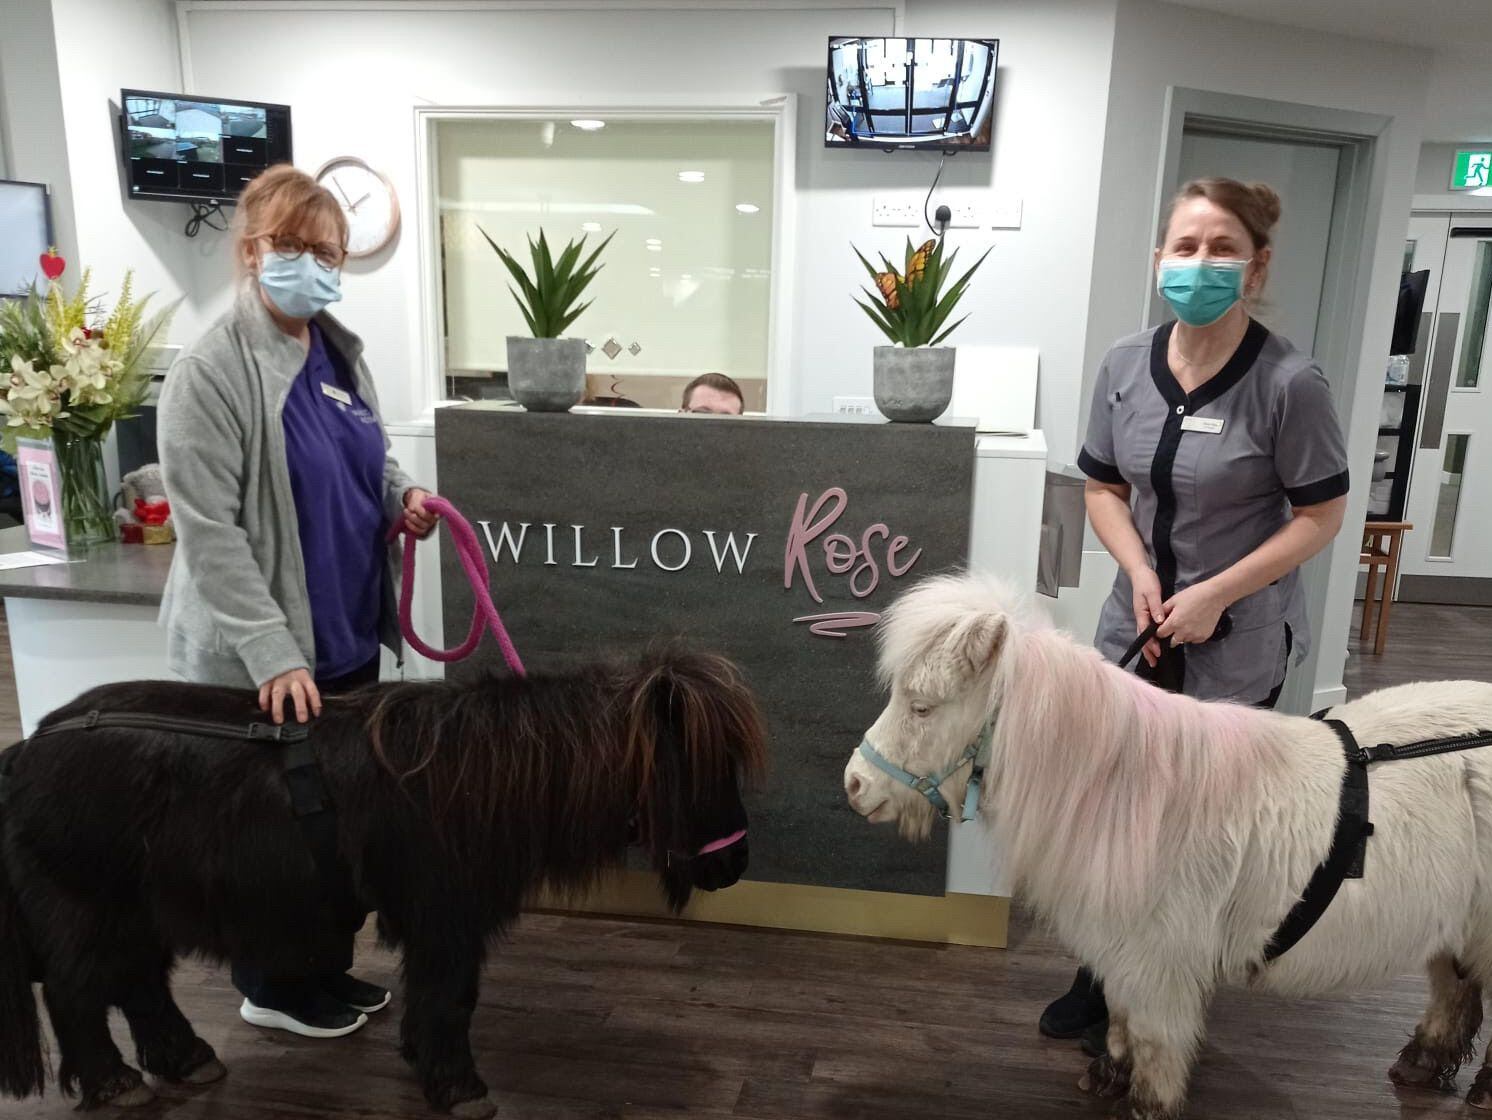 Care home residents visited by Shetland ponies 